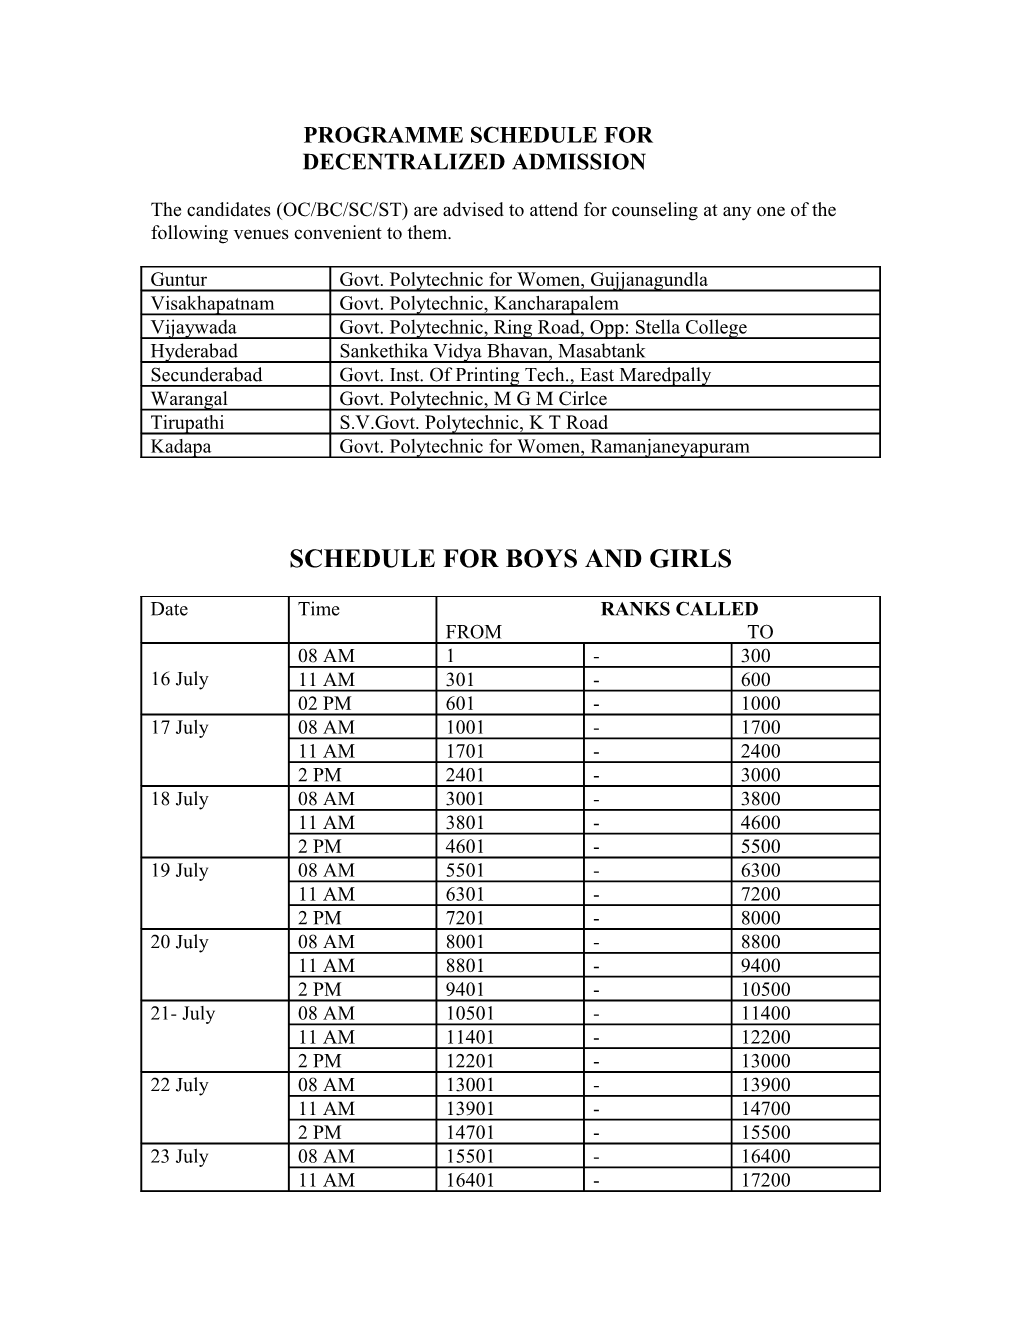 Schedule for Boys and Girls